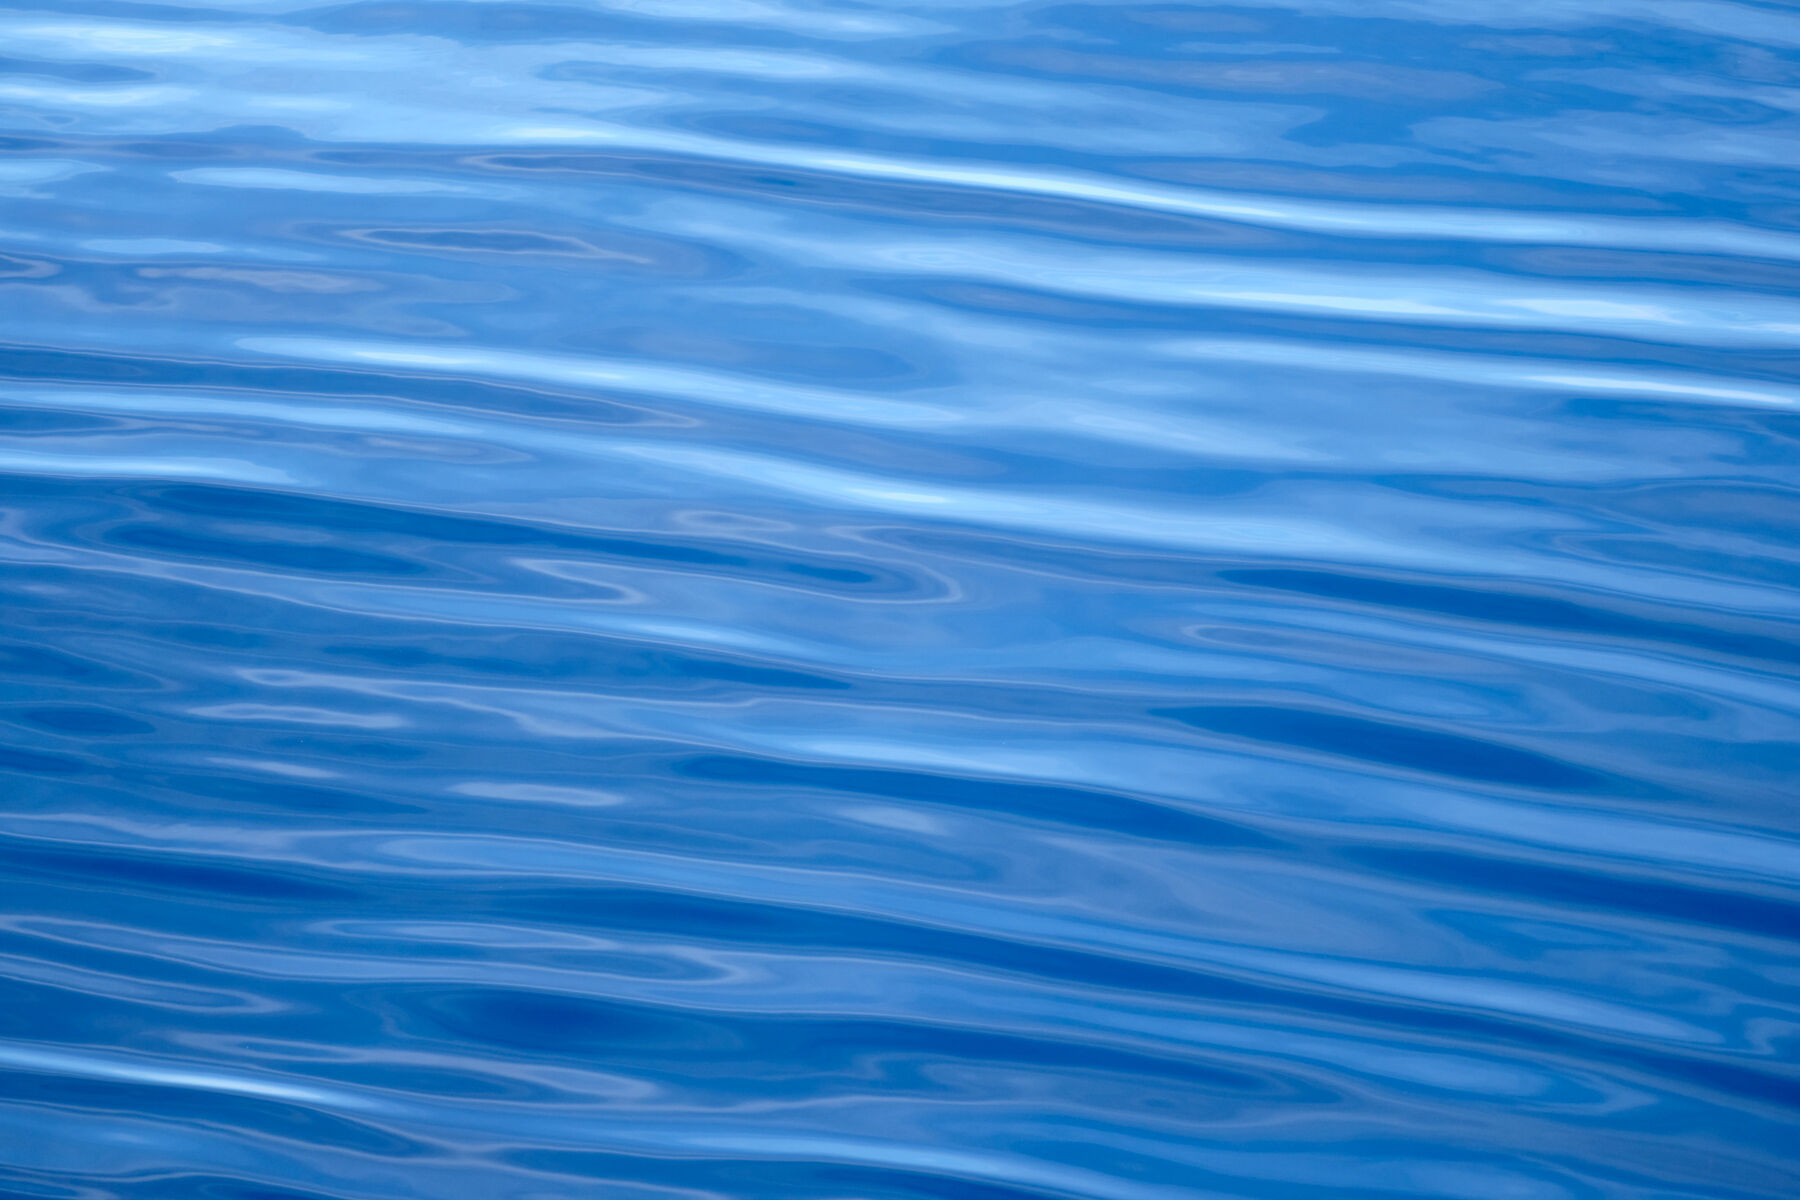 a blue abstract photograph of ripples in the ocean on the Hawaiian island of Maui.  Photographer Andrew Shoemaker captured this abstract image from a boat